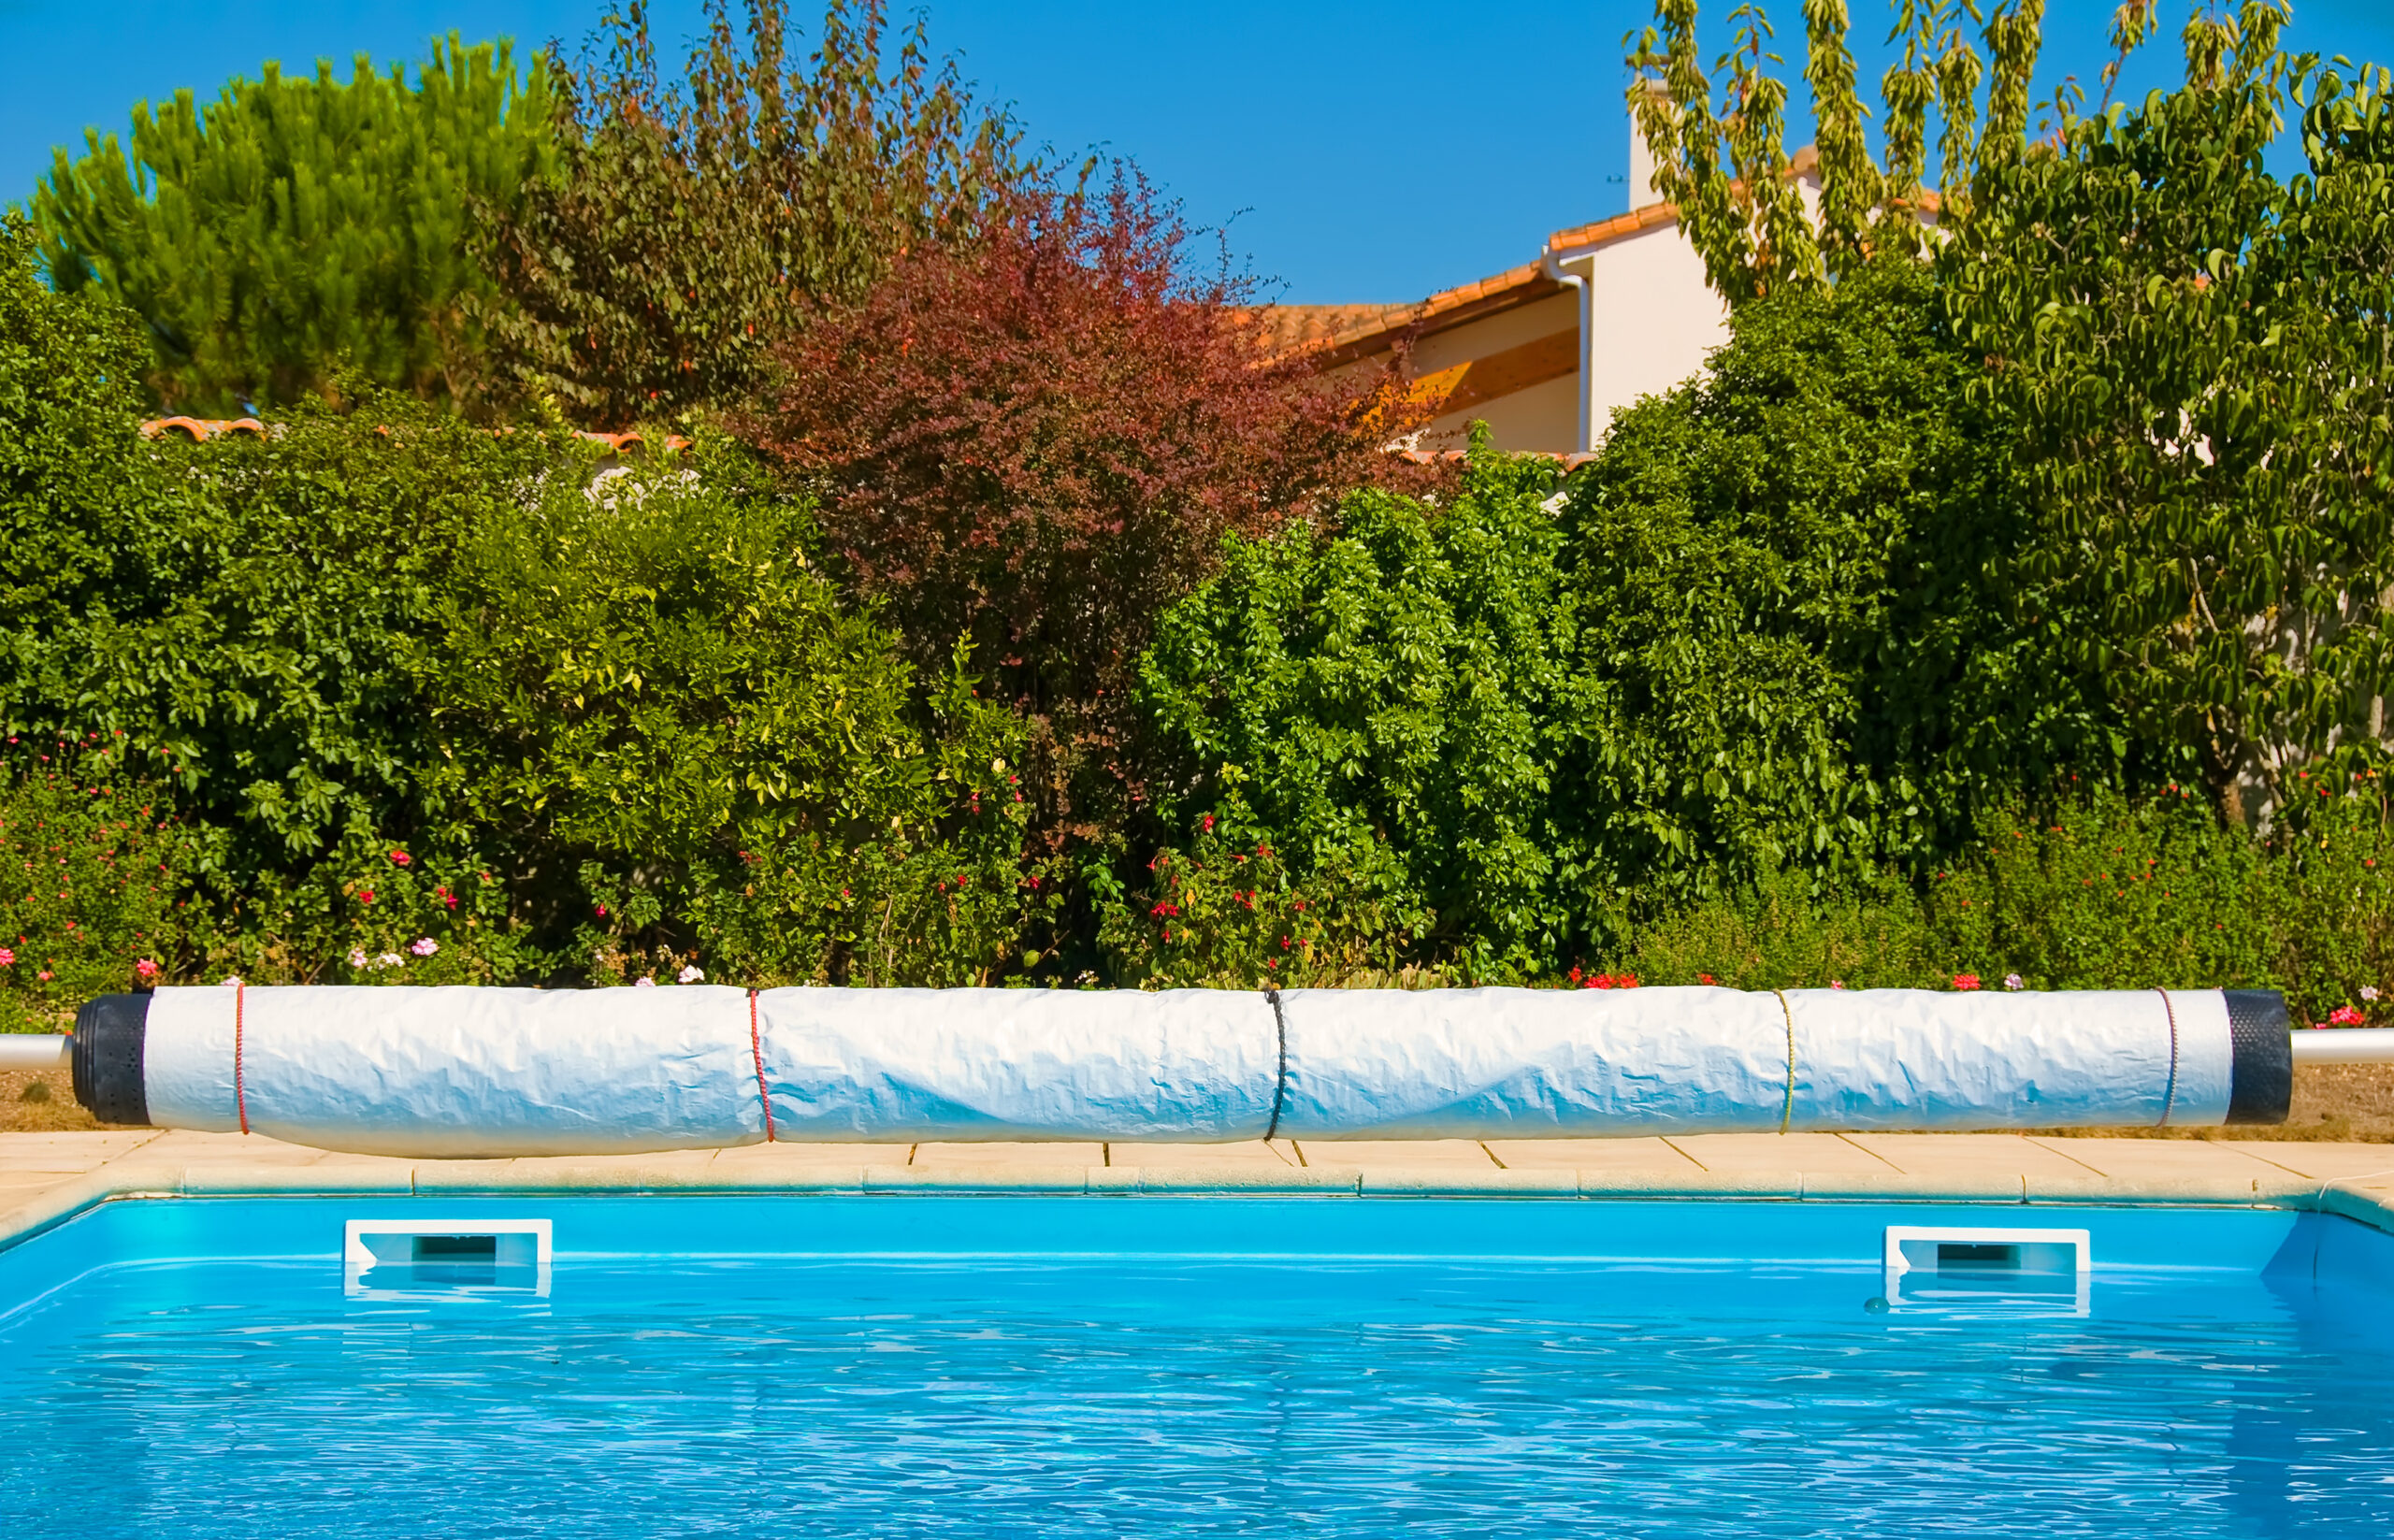 A pool cover securely placed over a swimming pool, providing protection and safety during periods of non-use.